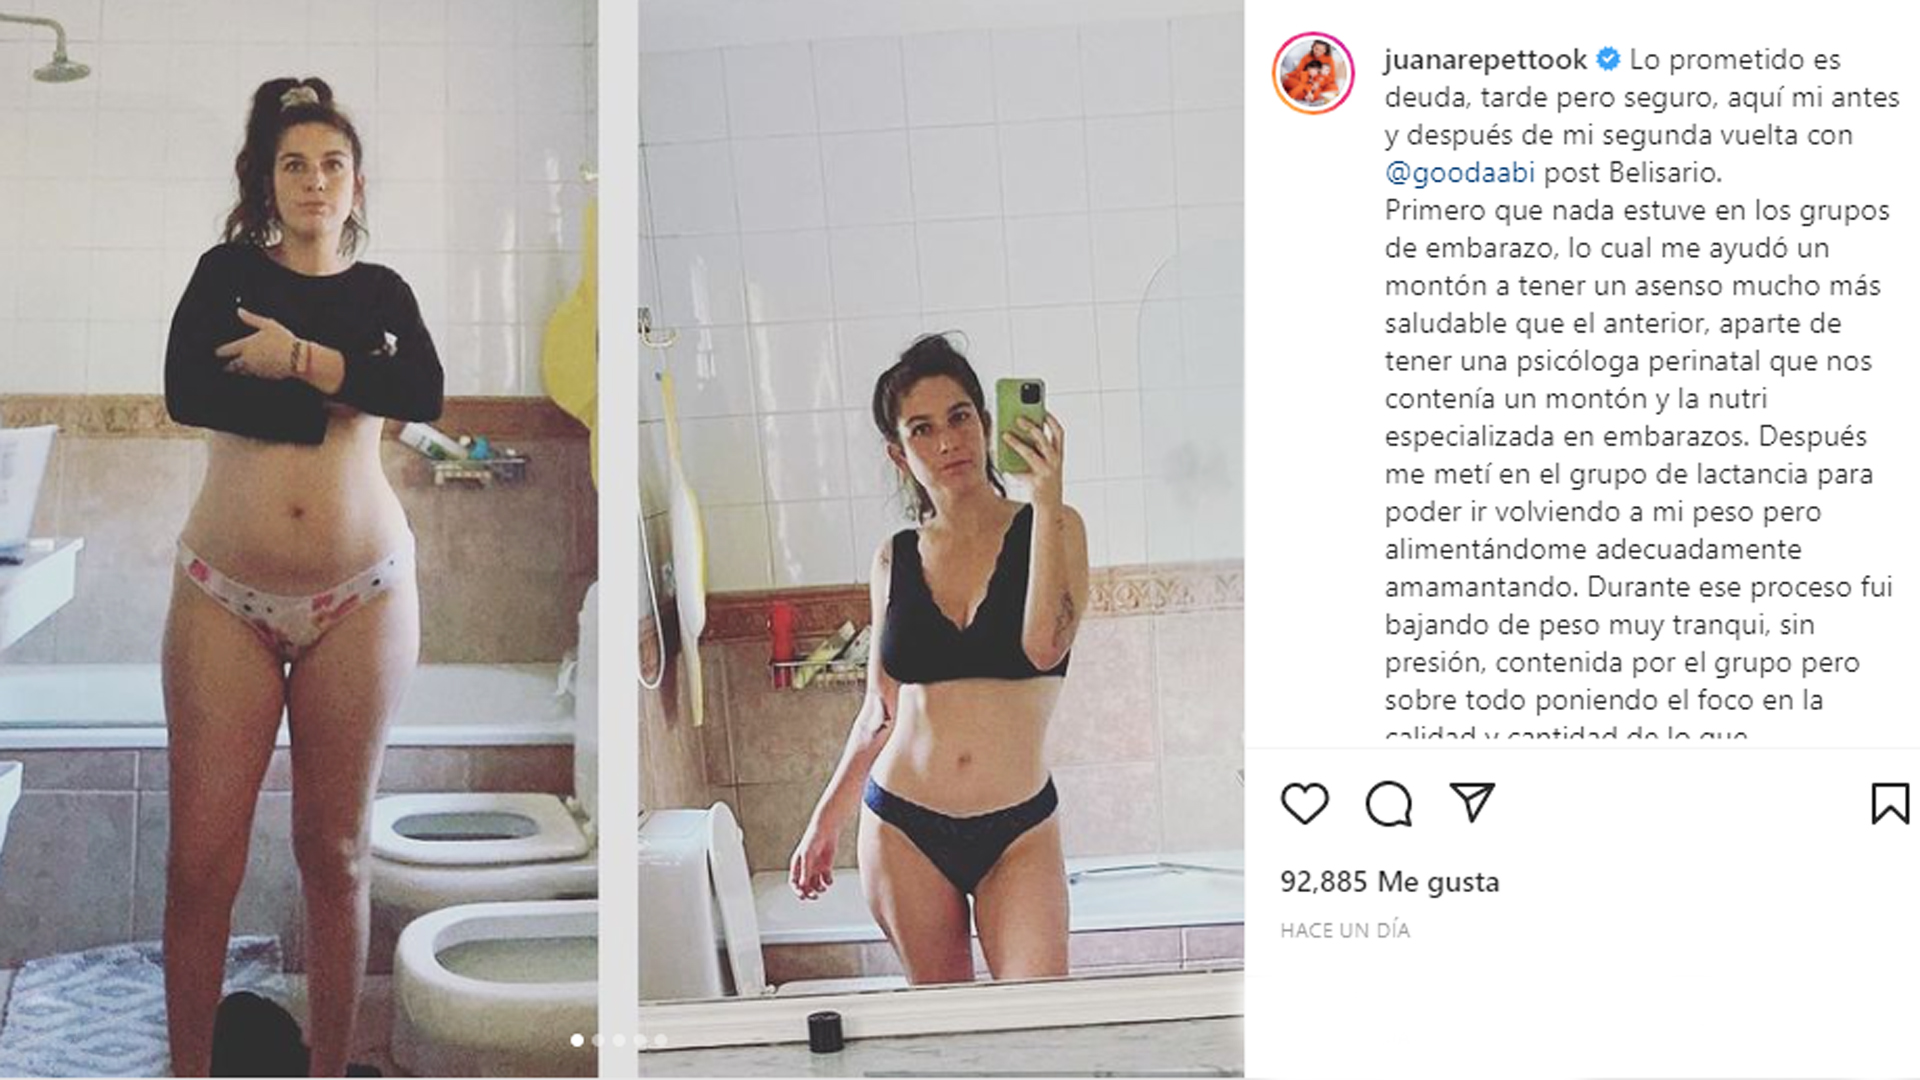 Before and after: Juana Repetto celebrated the results of the comprehensive nutritional plan she implemented shortly after Belisario's birth